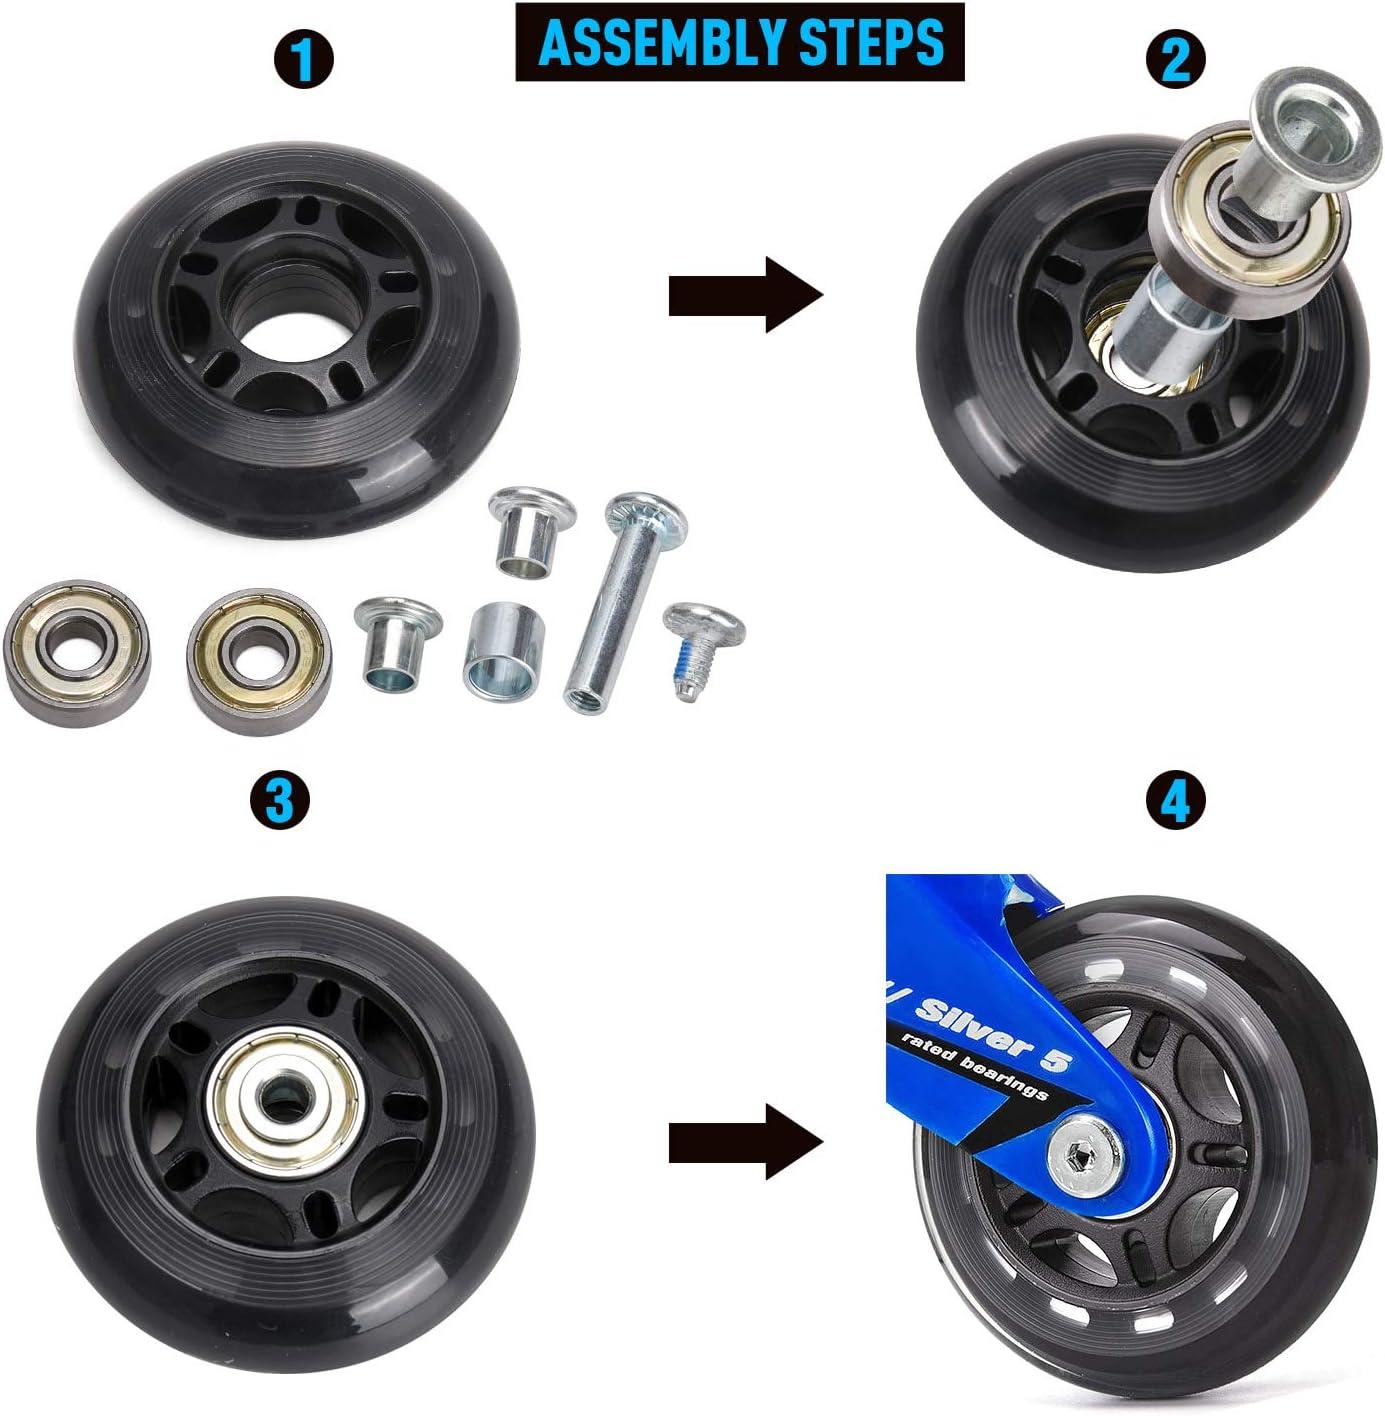 TOBWOLF Inline Skate Axle Spacer Screw Replacement, Aluminum Alloy  Rollerblade Skate Wheel Bearing Spacer, Roller Skate Replacement  Accessories with Axle & Axles Screws & Wrench 6mm Axle + 6mm Frame Spacer +